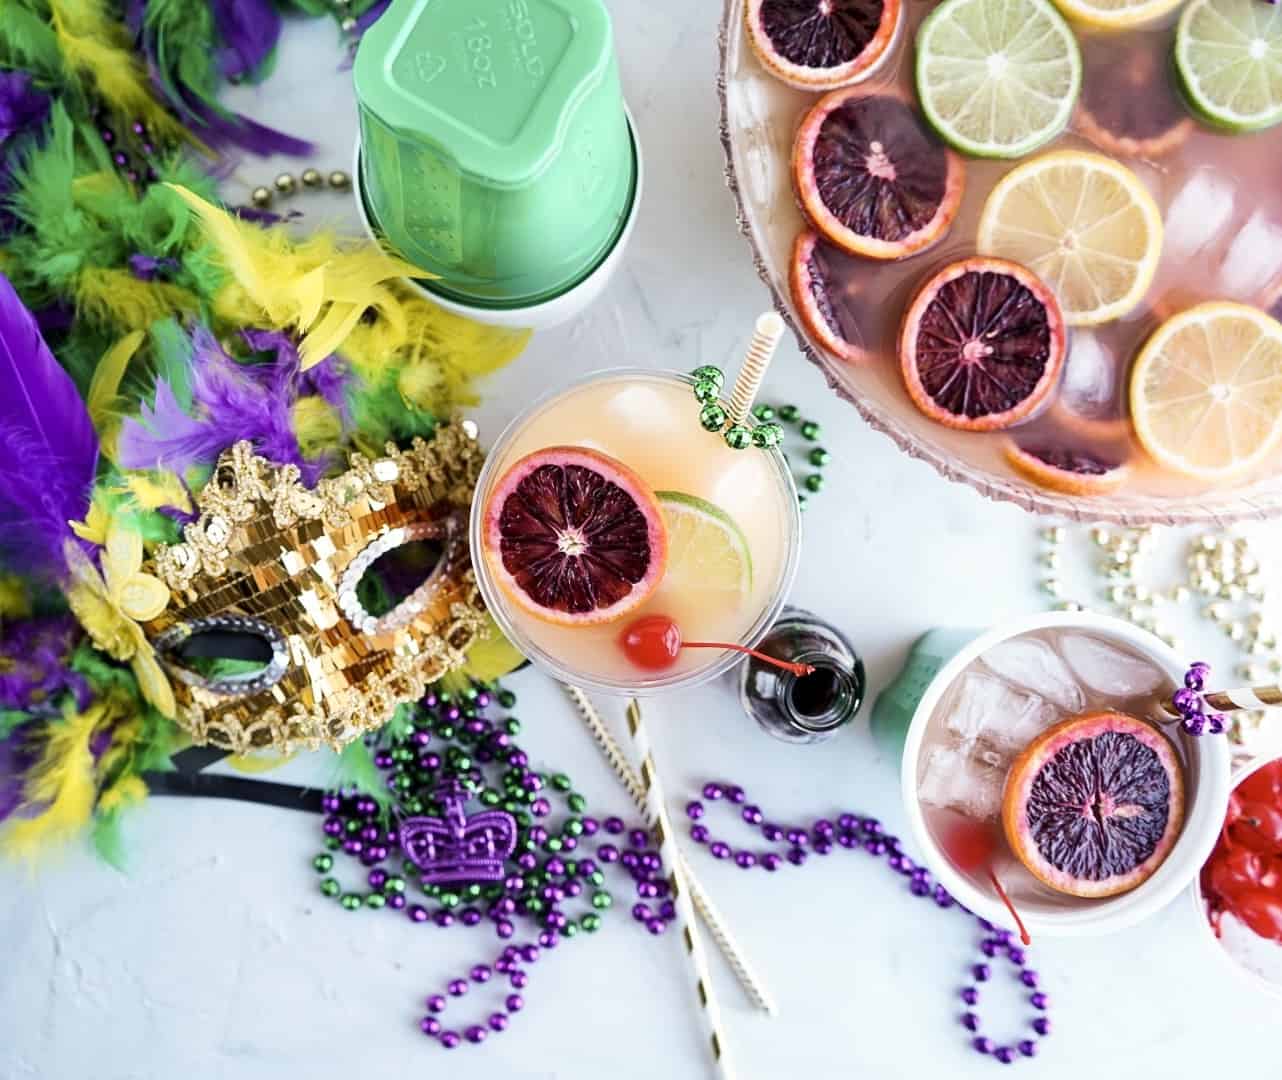 Hurricane Punch in cup with mardi gras mask and beads